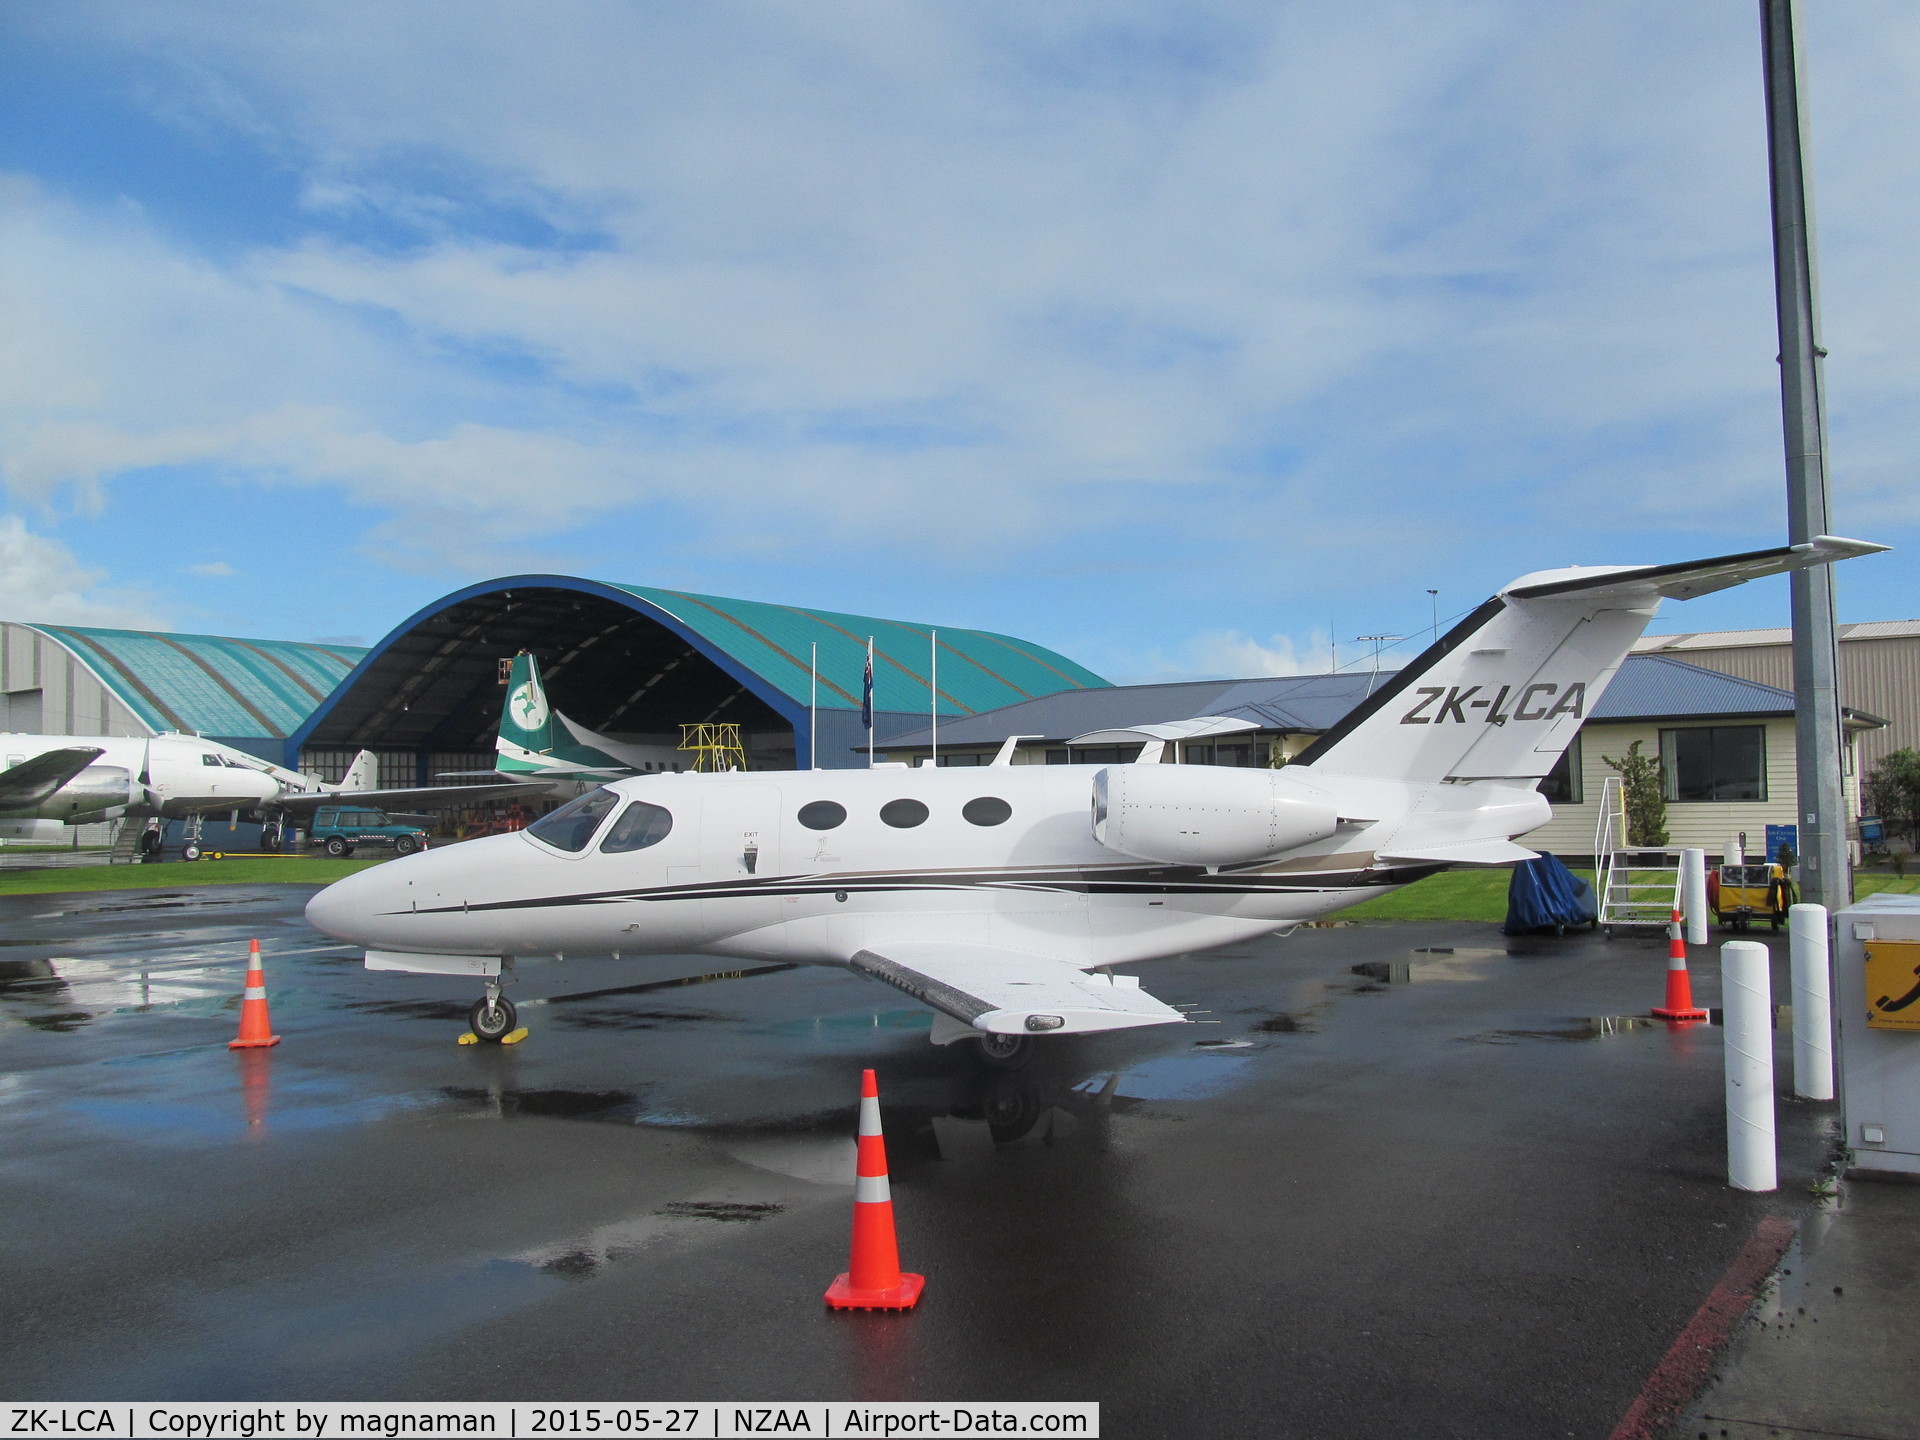 ZK-LCA, 2007 Cessna 510 Citation Mustang Citation Mustang C/N 510-0011, at NZAA today on a mission.